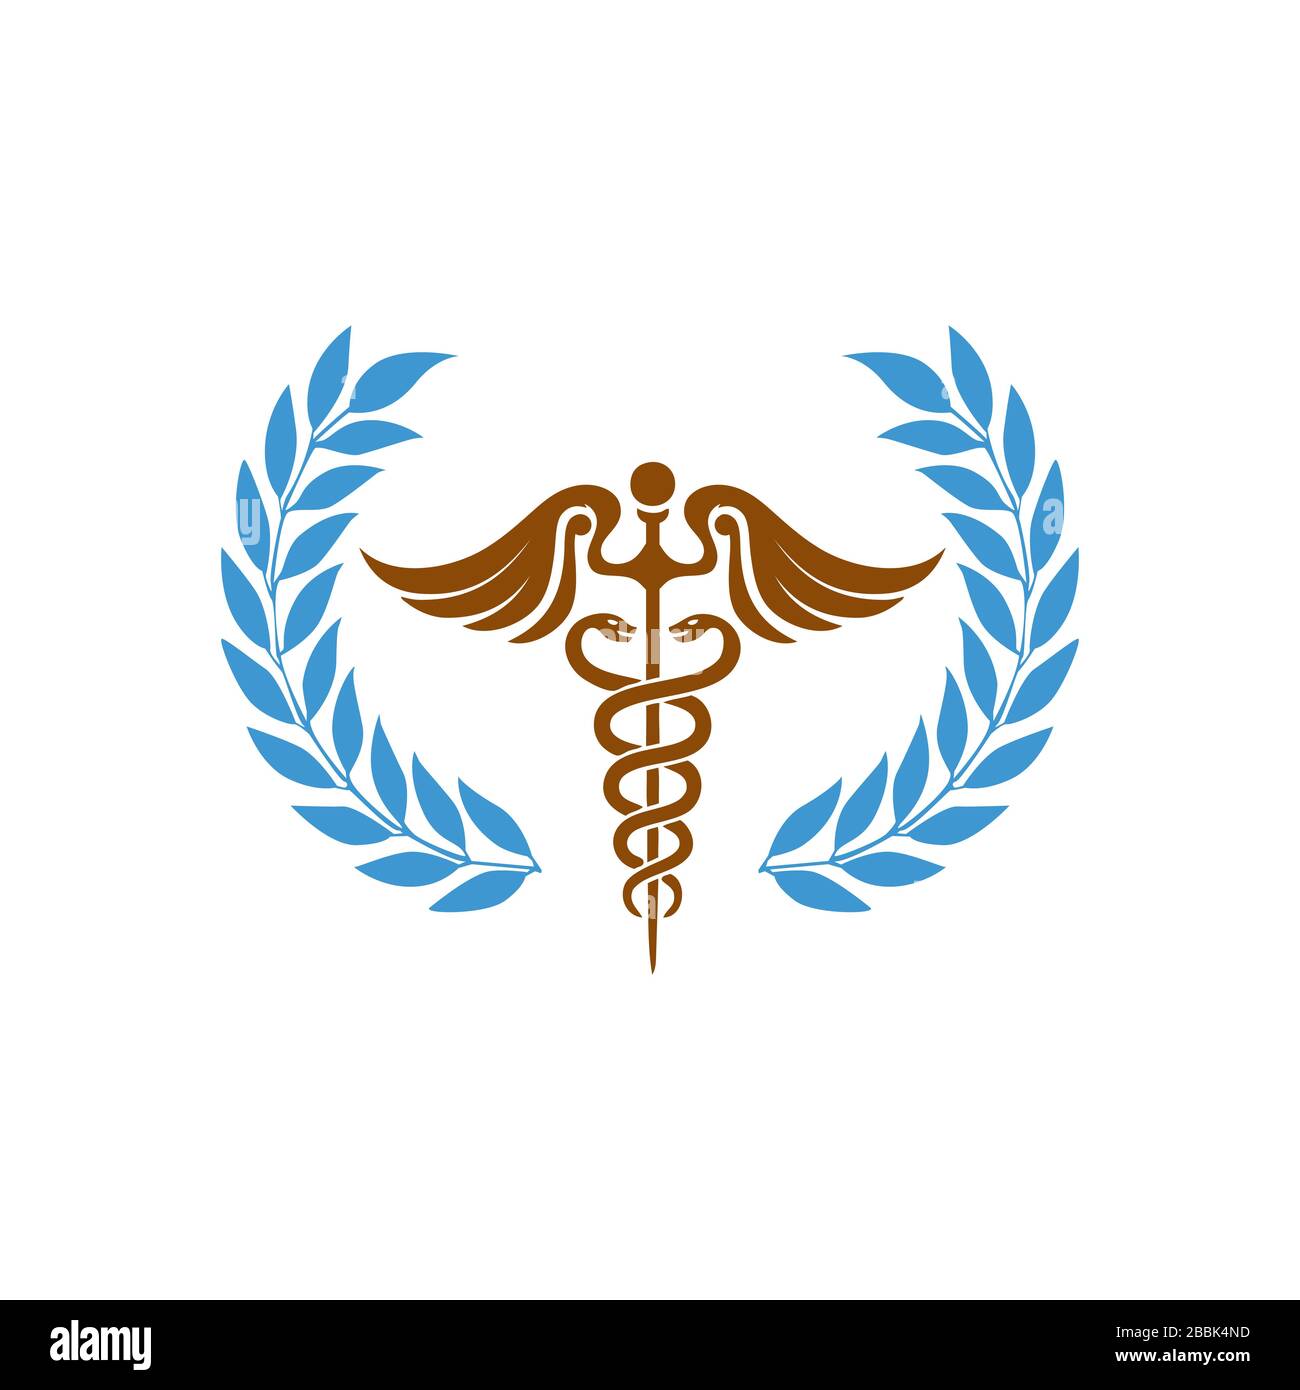 Medical Health Caduceus symbol Asclepius's snake and Wand logo with wealth rice icon Stock Vector